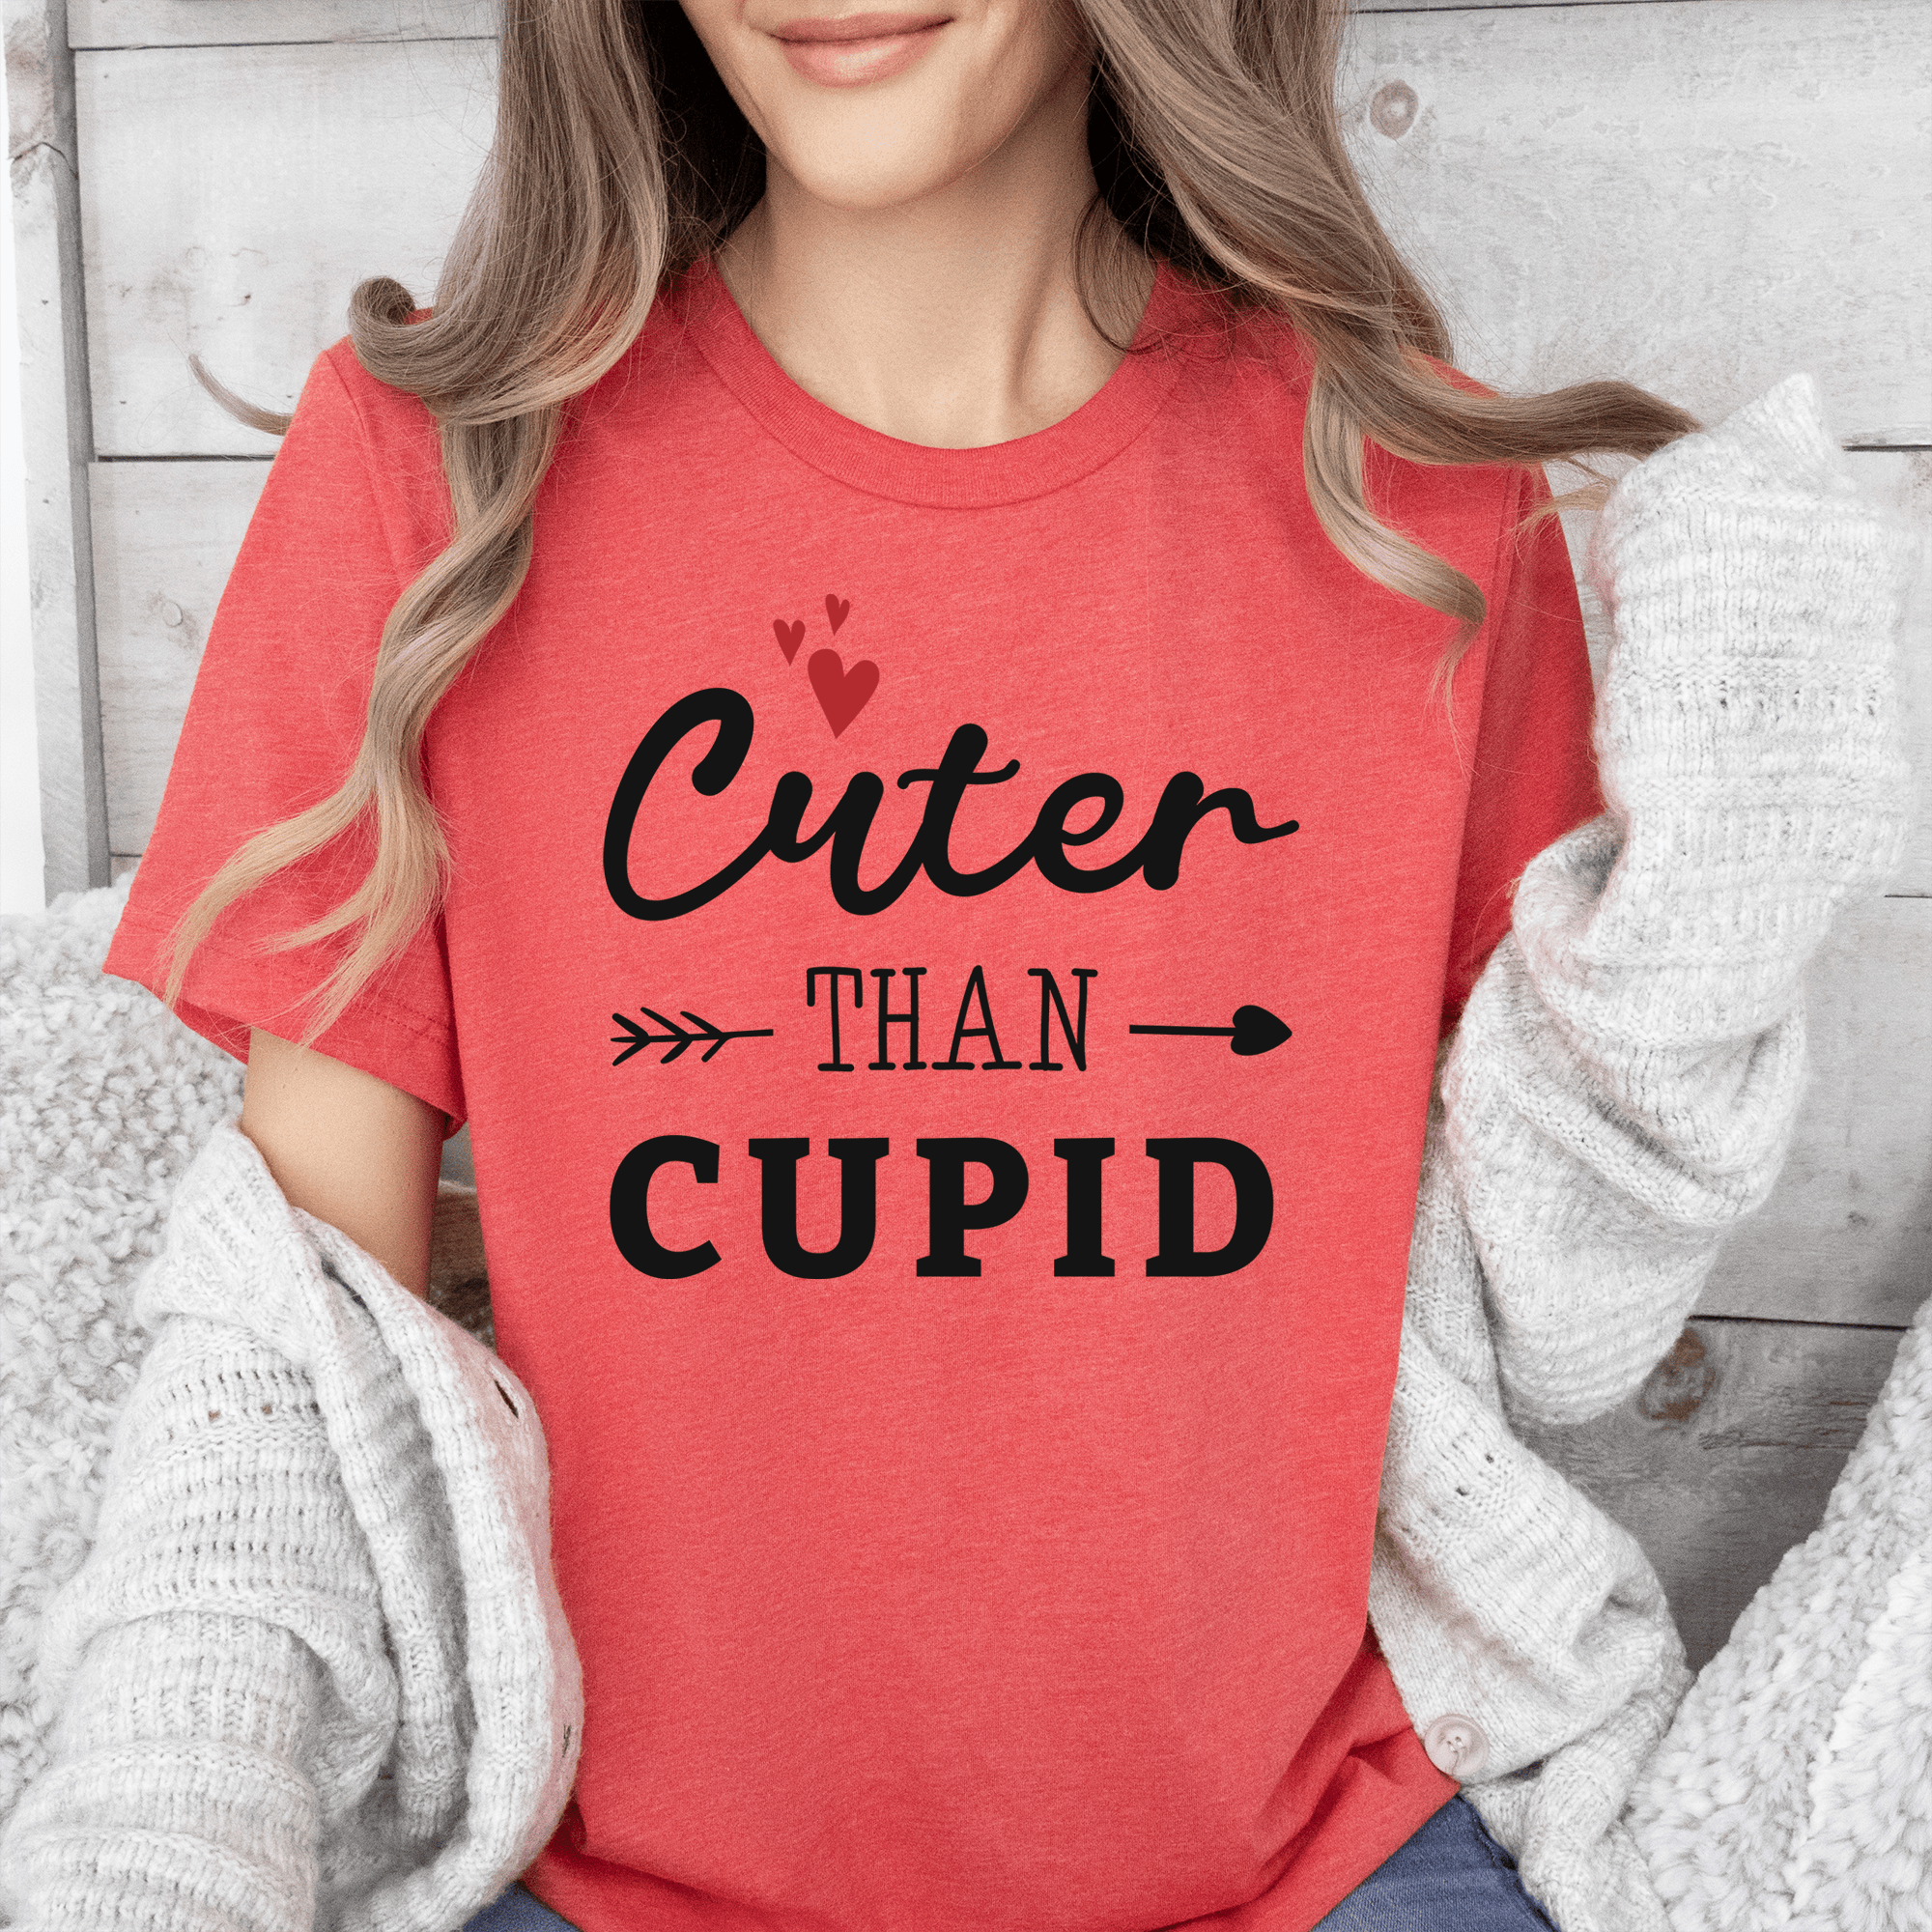 Light Red Womens T-Shirt With Cuter Than Cupid Design